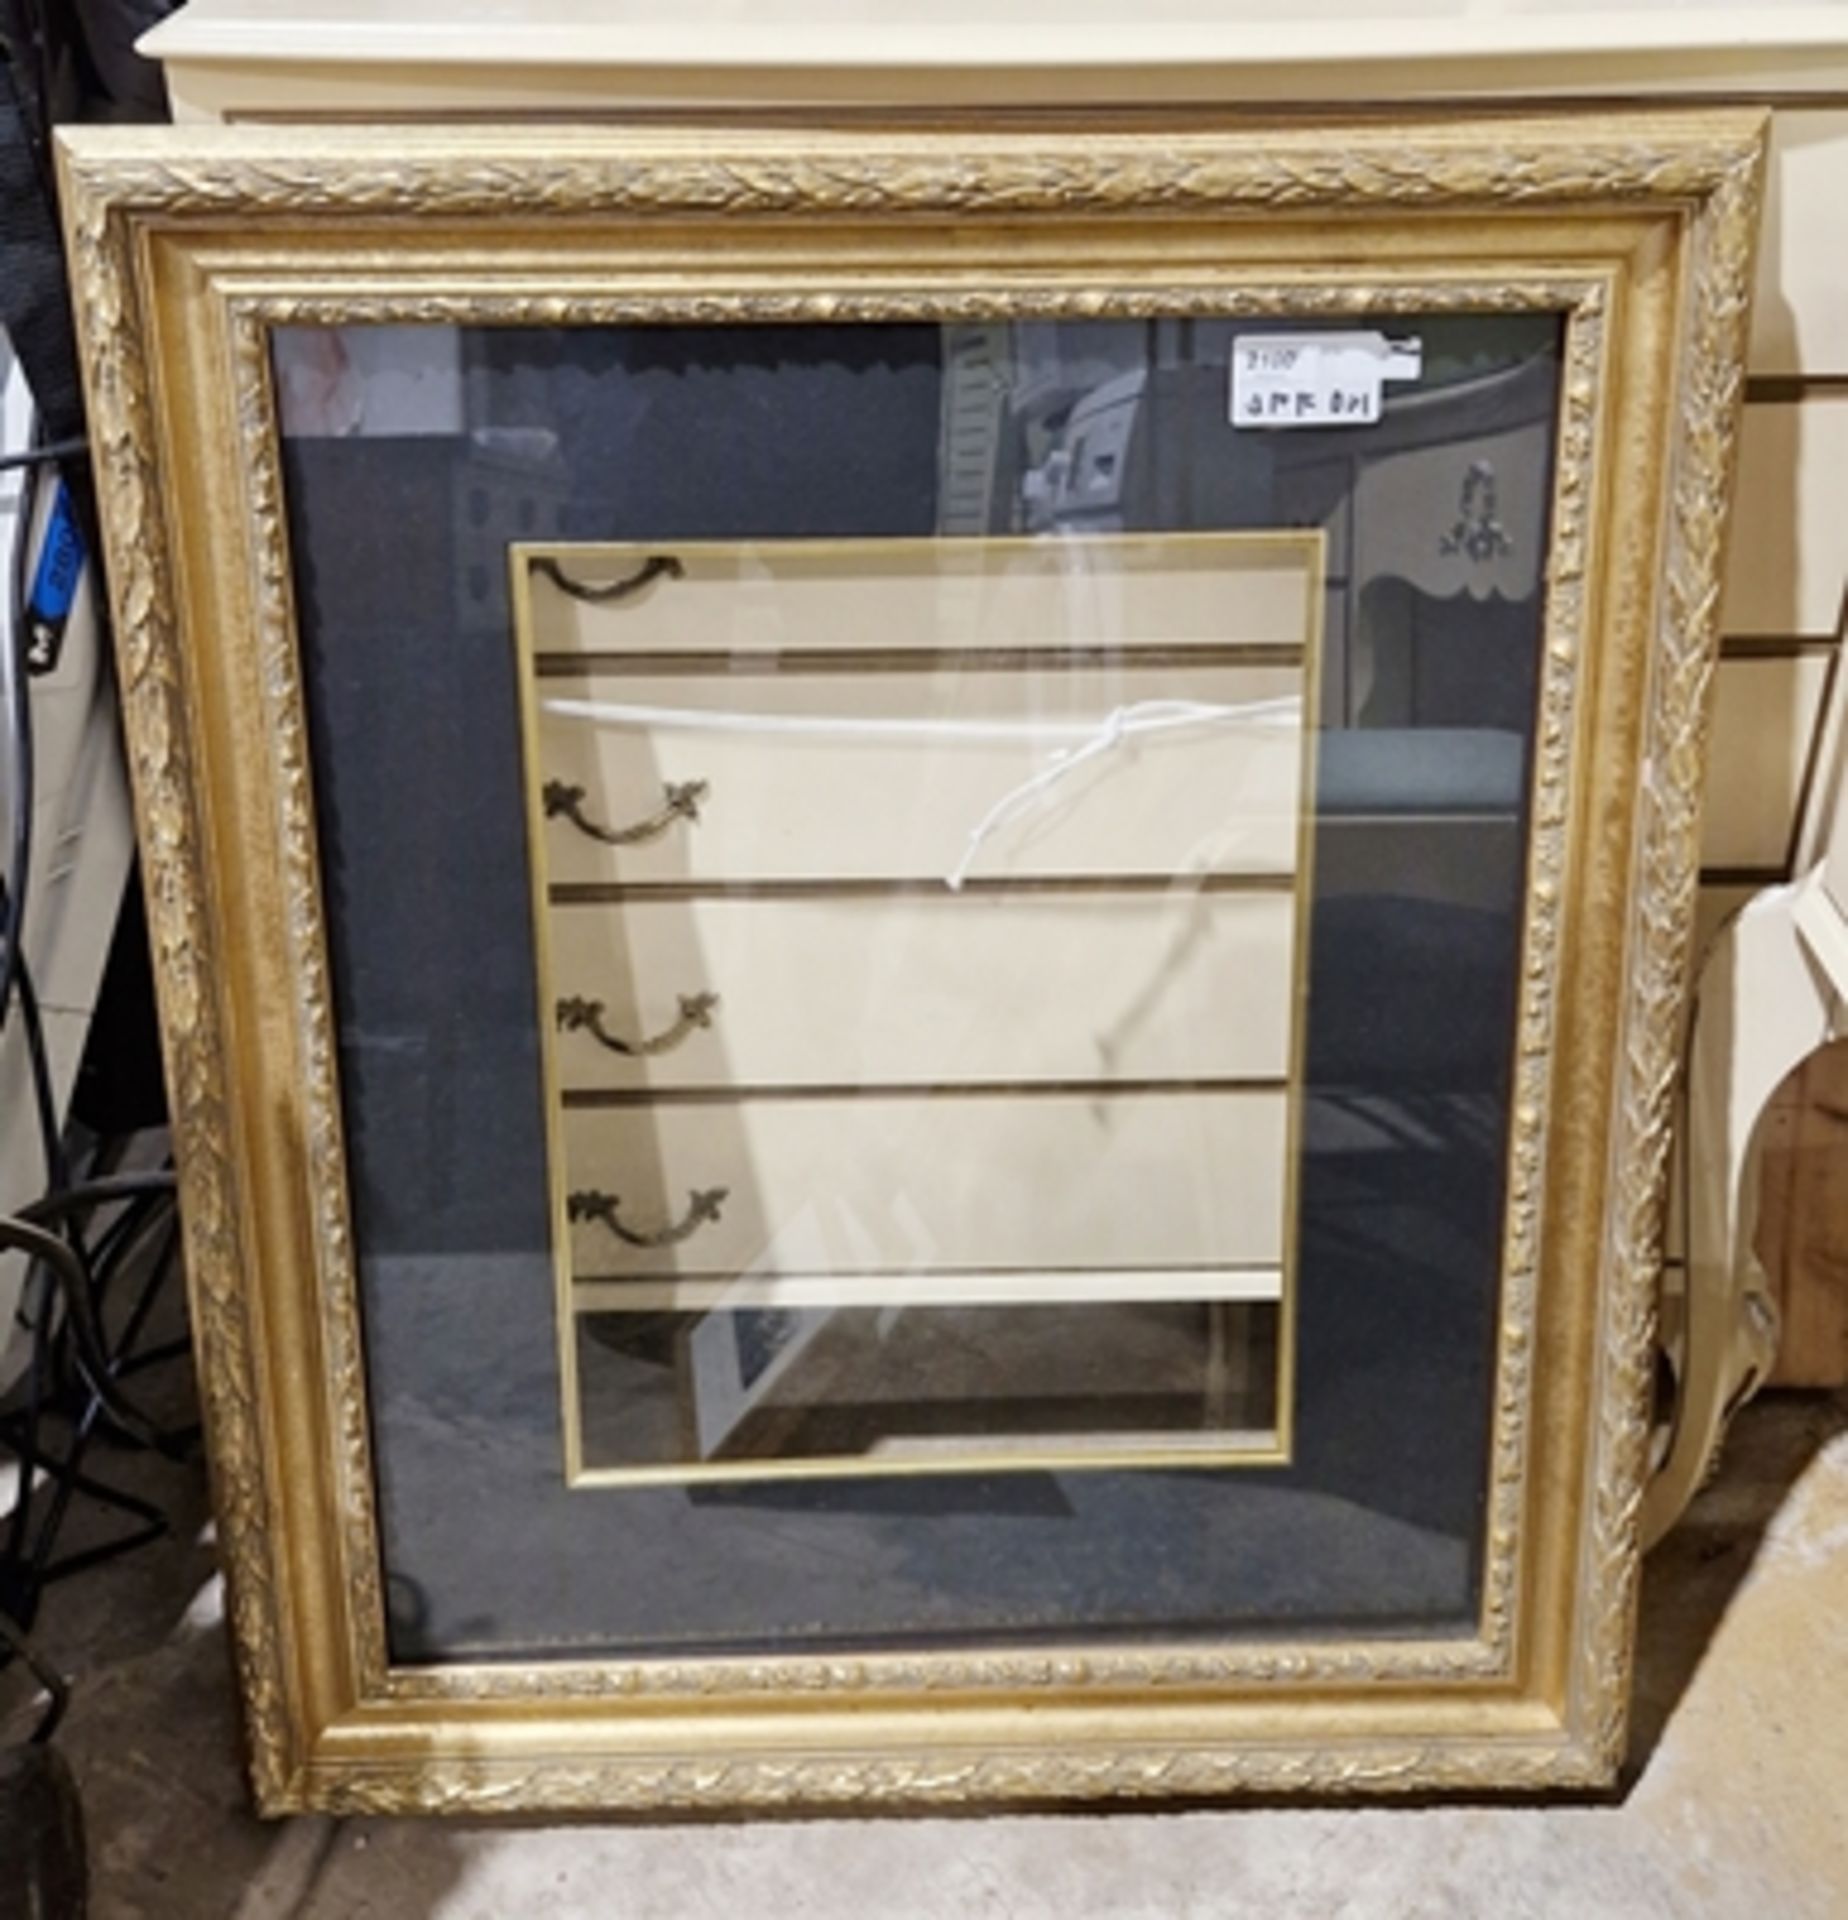 Impressive gilt picture frame, with mount and glass